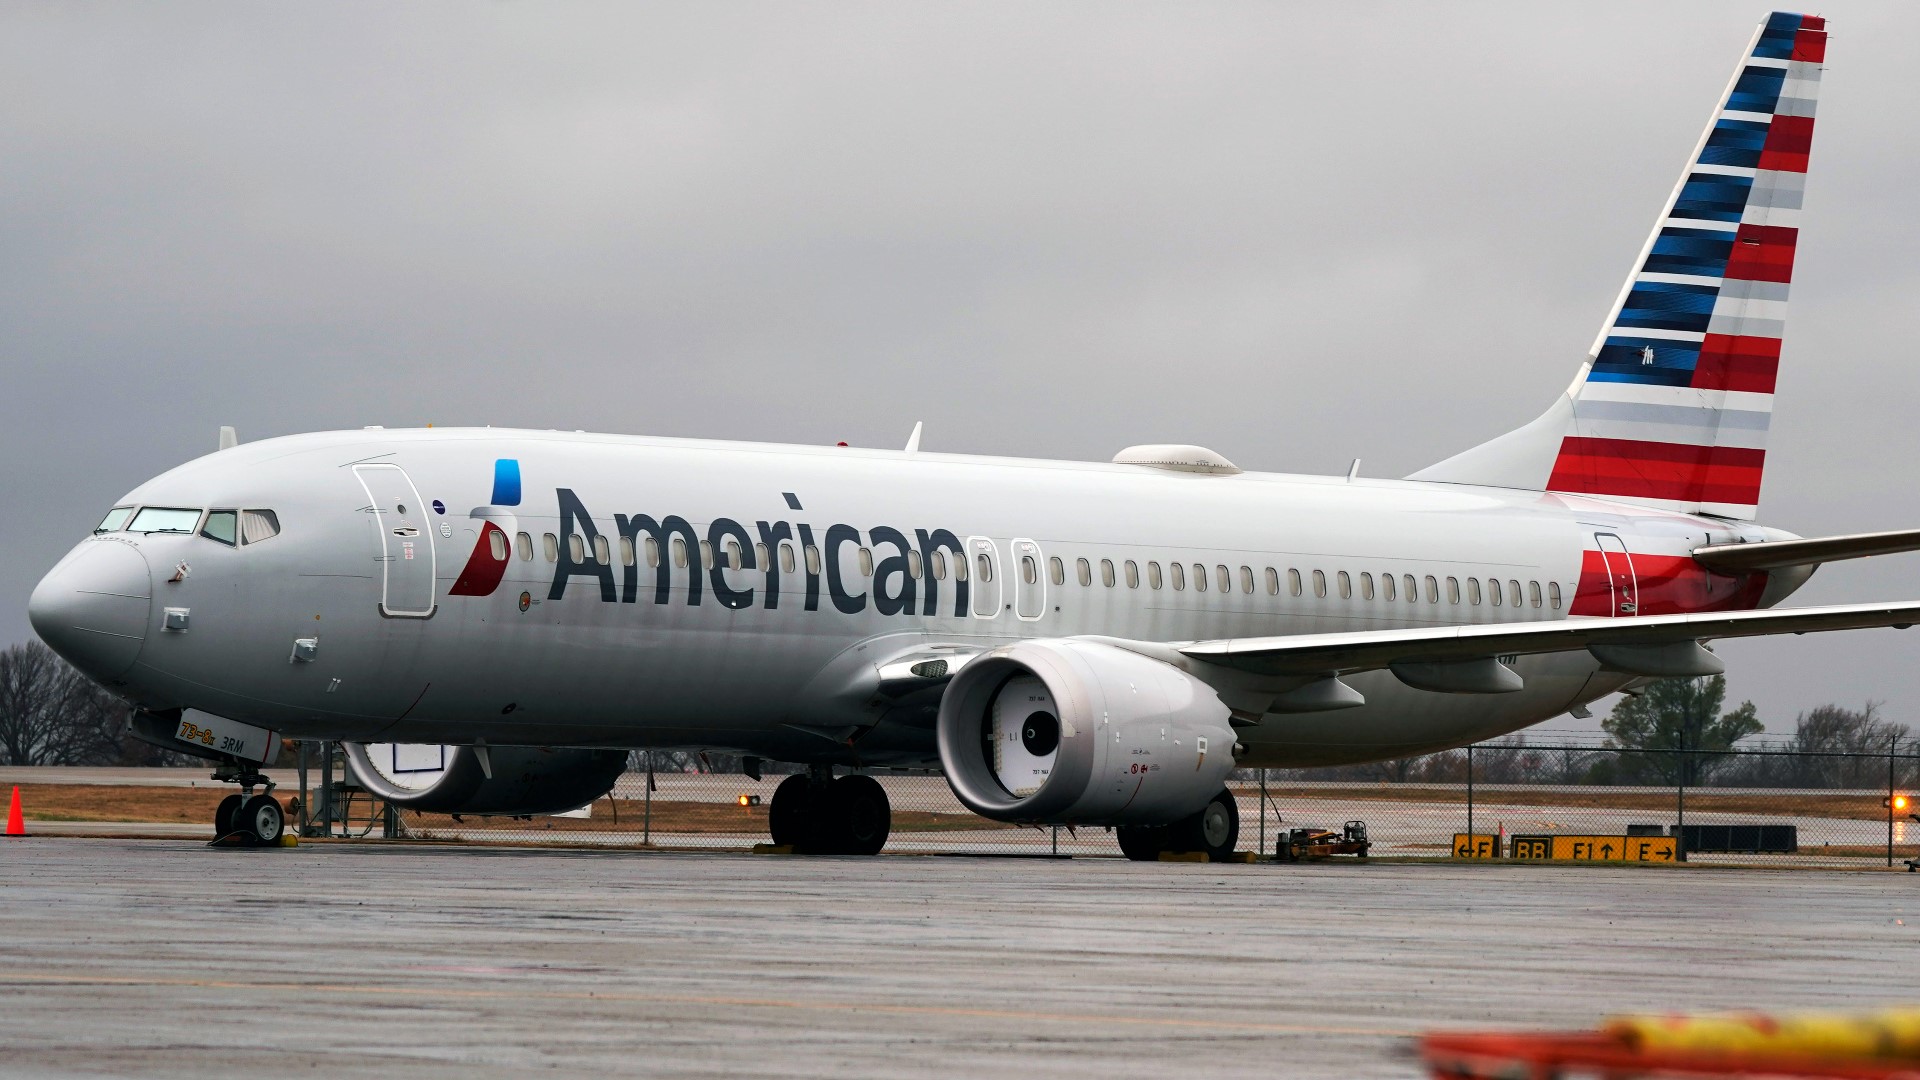 American Airlines is bringing back workers, services and flights.